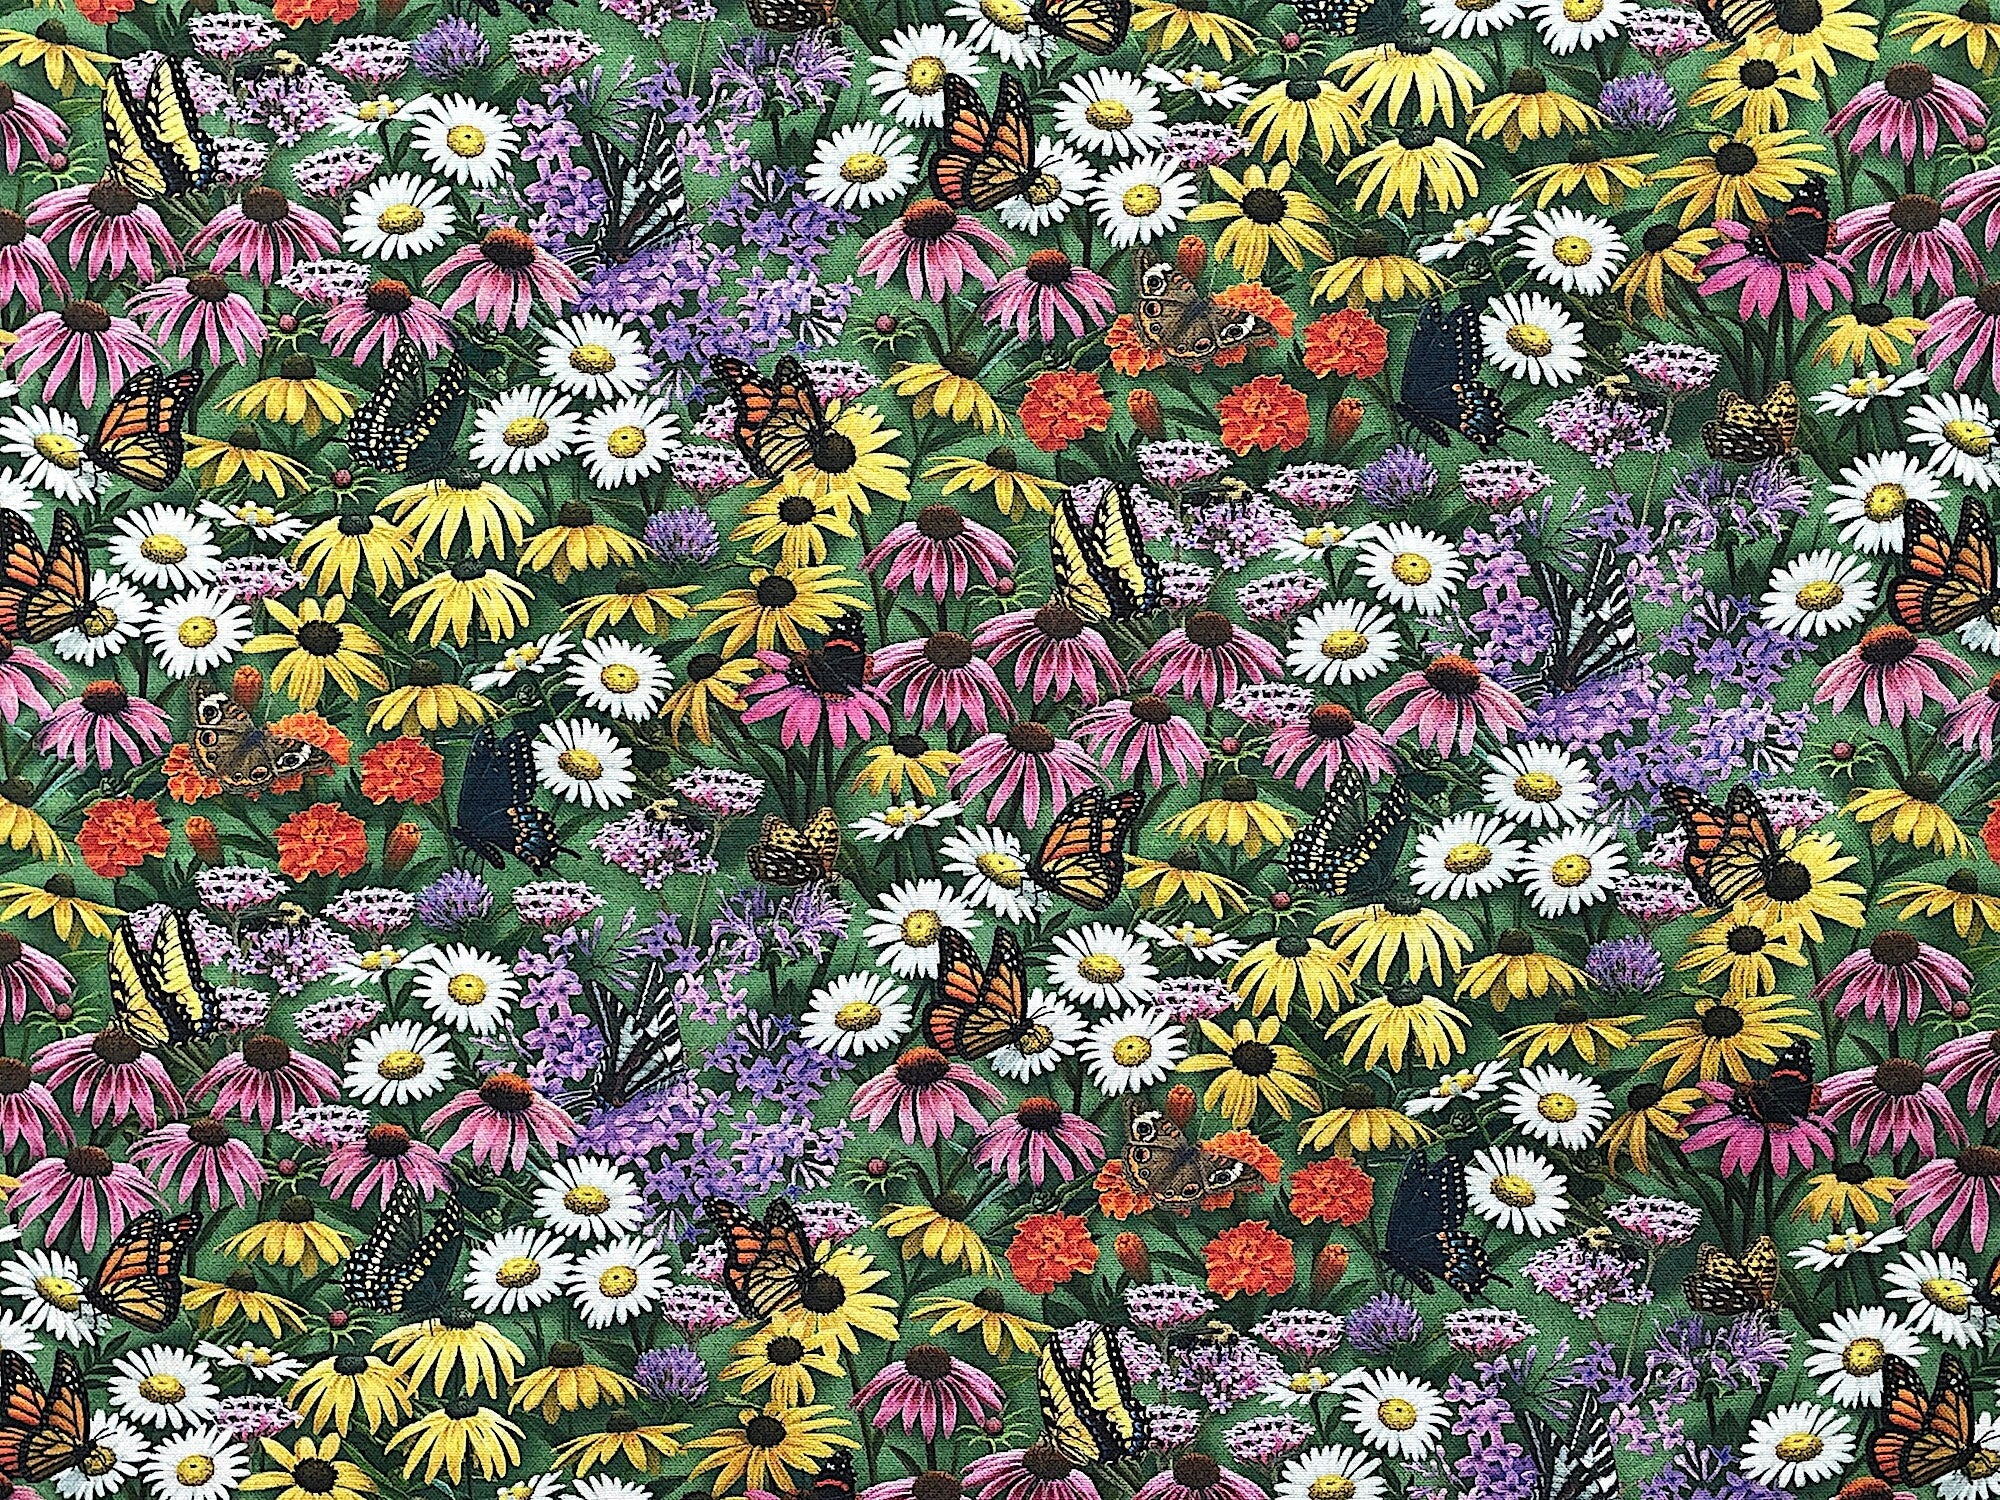 Cotton fabric covered with a field of flowers with butterflies on flowers.